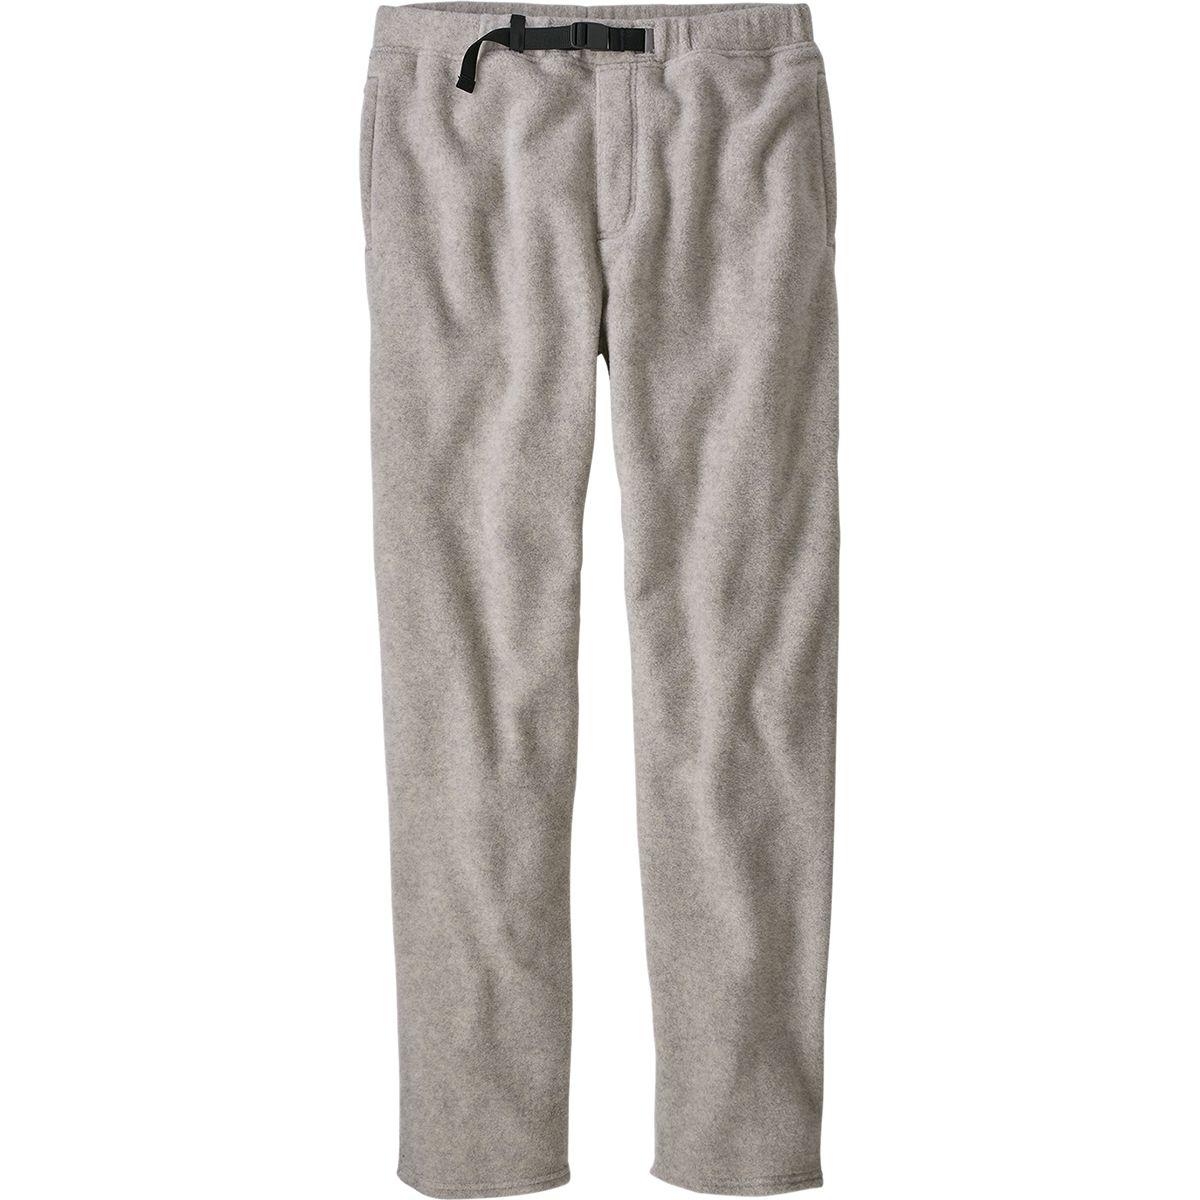 Patagonia Synchilla Snap-t Fleece Pant in Oatmeal Heather (Gray) for ...